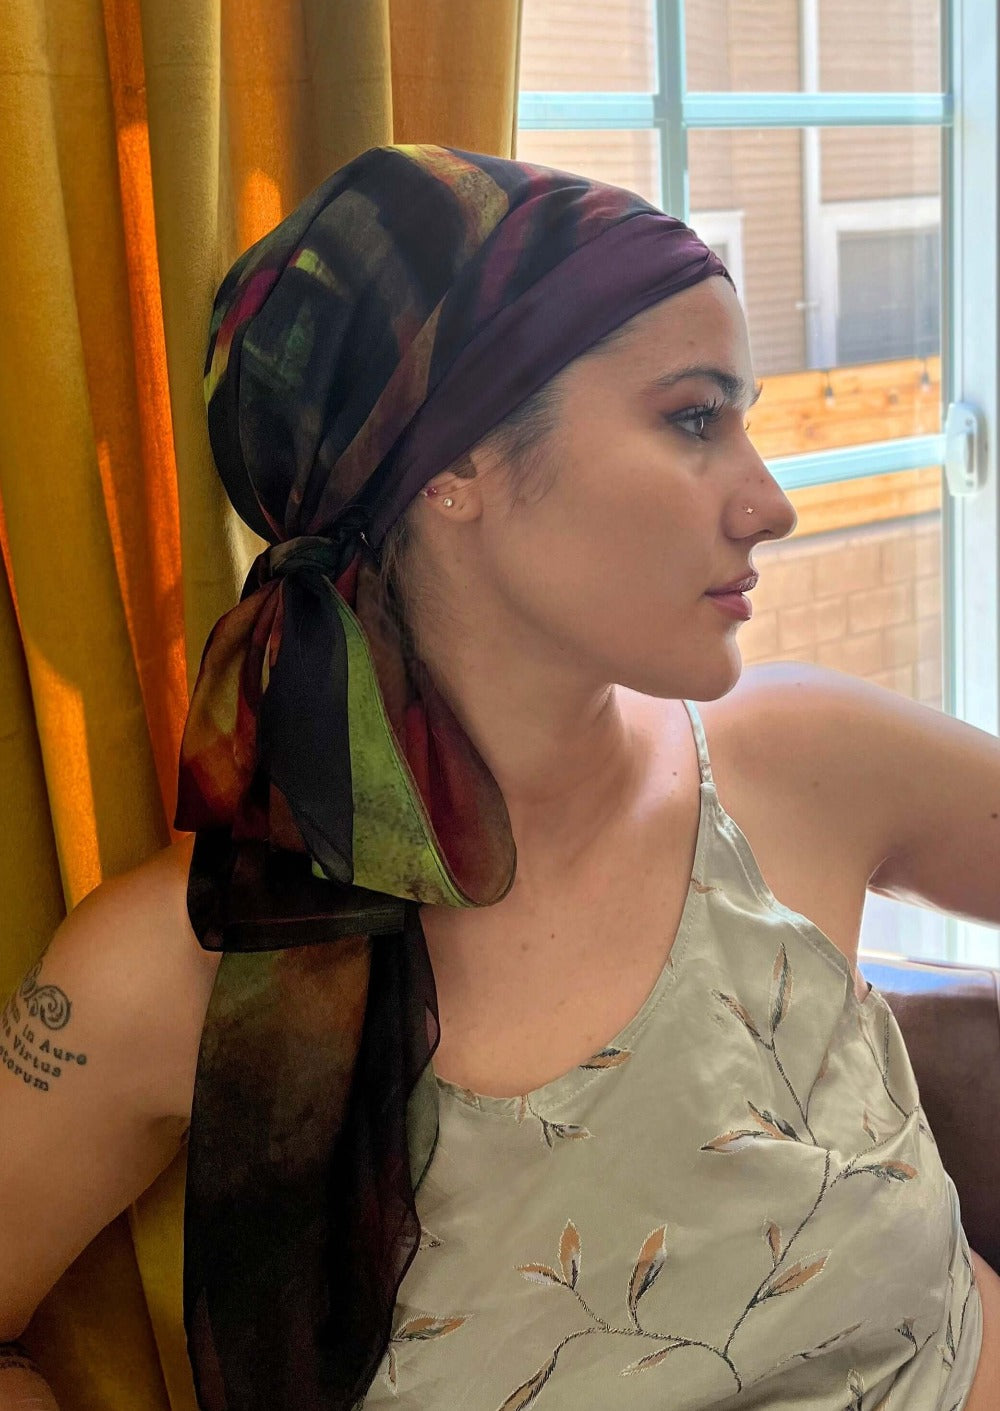 A beautiful woman, looking out a window shows off her luxurious chiffon and silk headscarf. It is an abstract print is wine colored with brush strokes of black, blood red and hints of bright green and chartreuse.